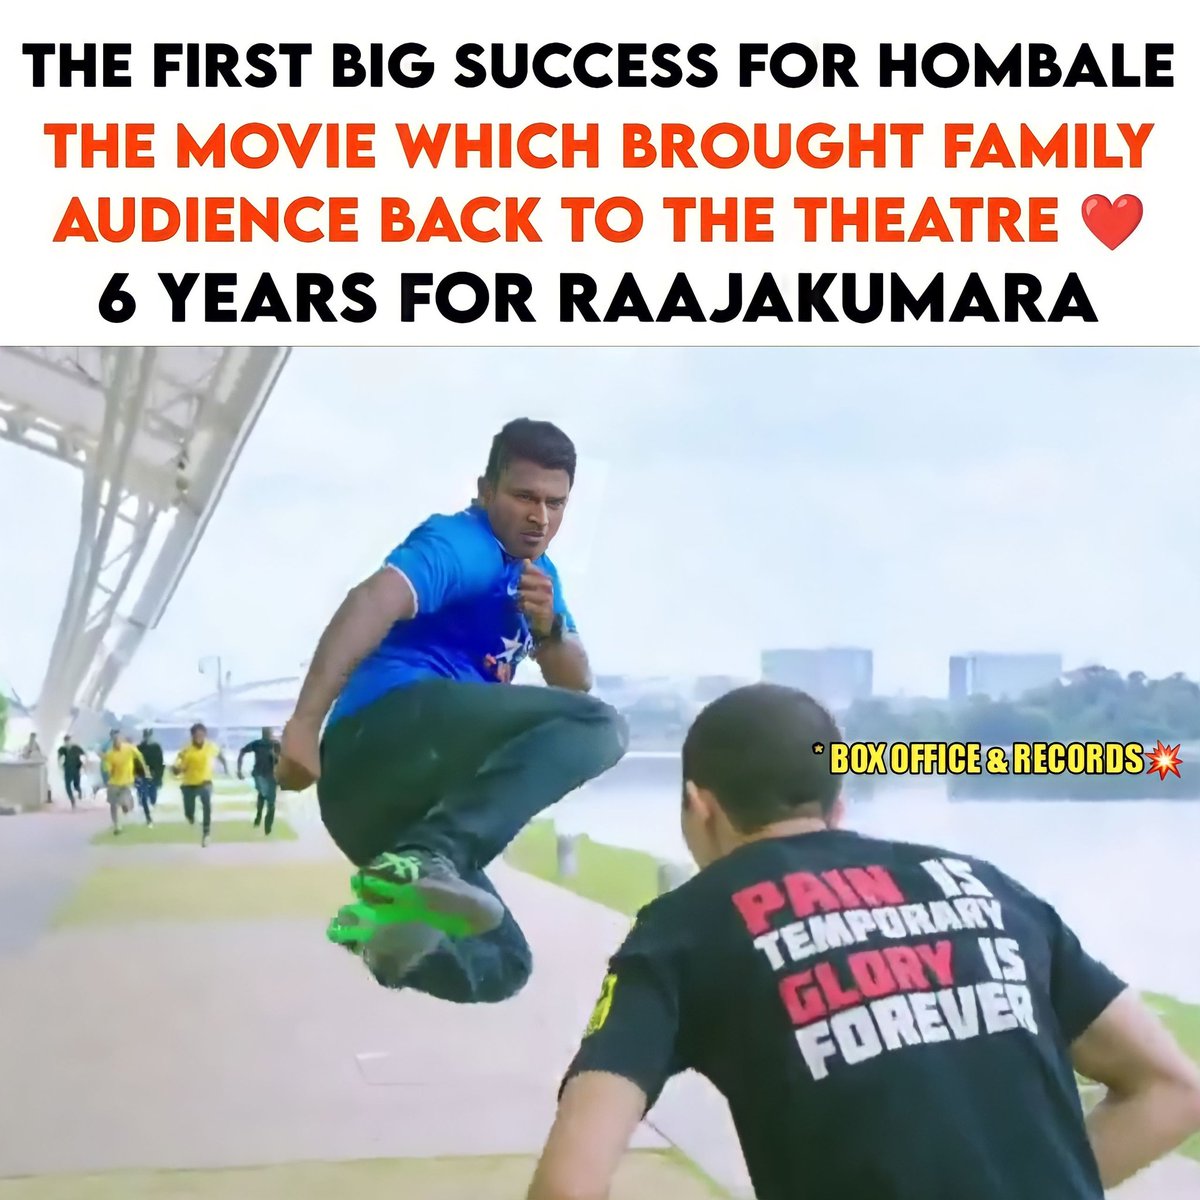 THE RECORDS AND COLLECTION OF THIS MOVIE IS STILL A DREAM FOR MANY.😅💥
.
#DrPuneethRajkumar #KingAppu #6yearsforraajakumara